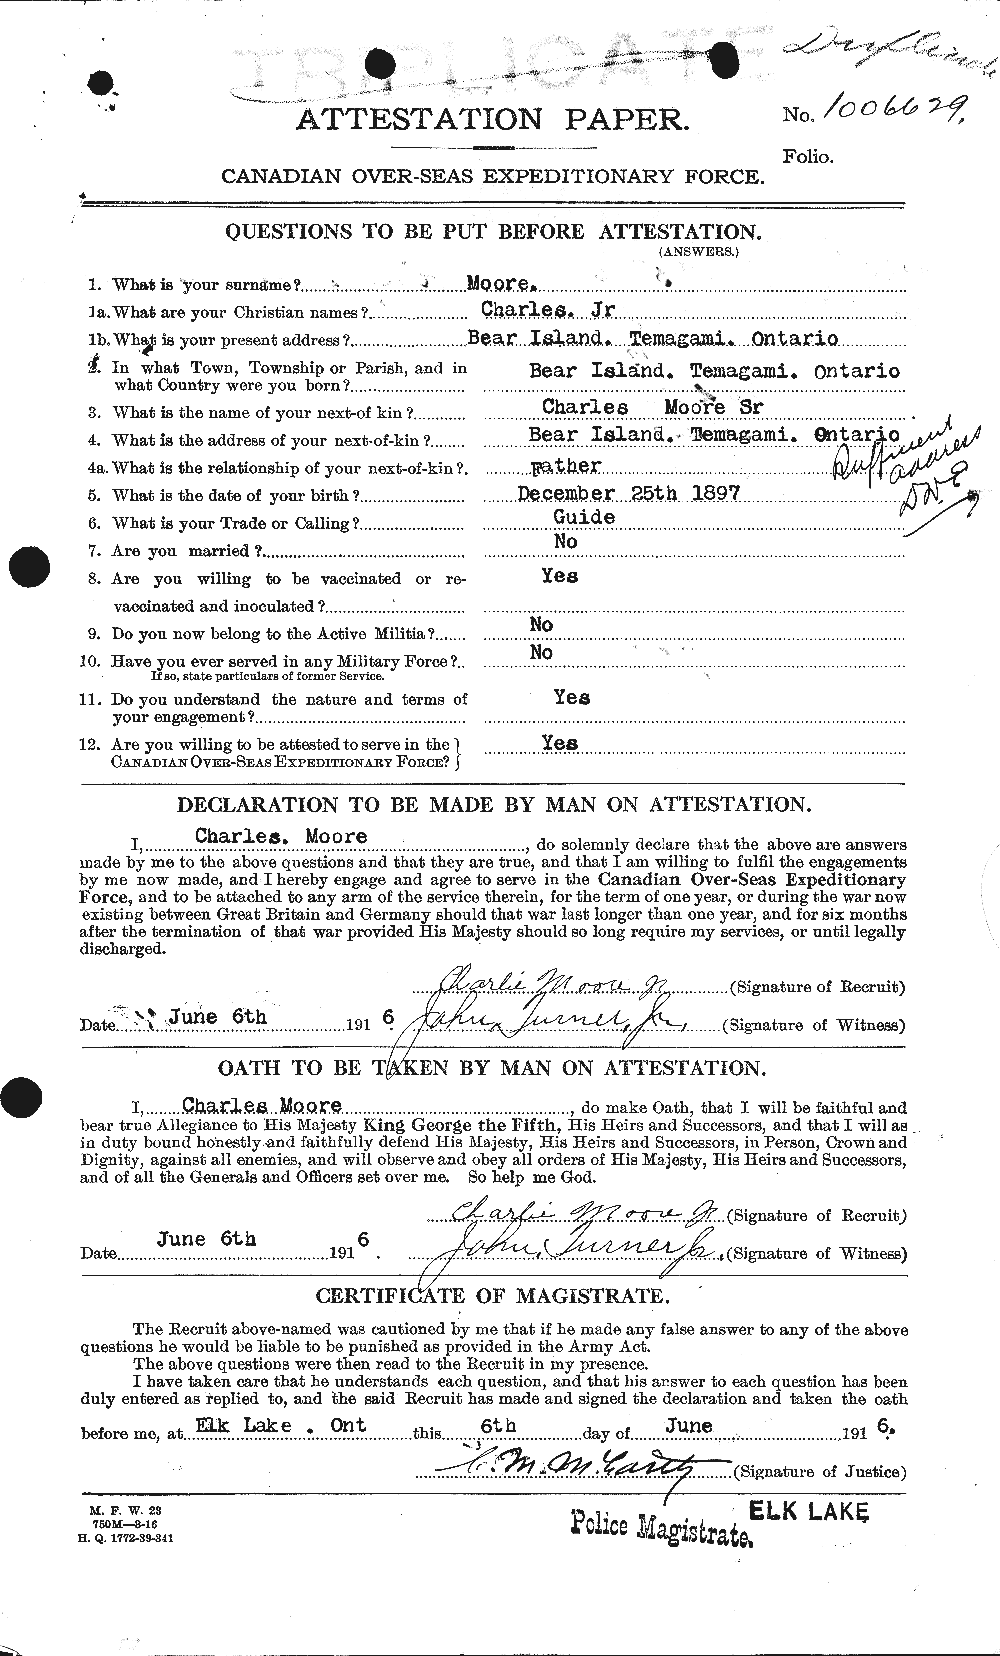 Personnel Records of the First World War - CEF 506487a